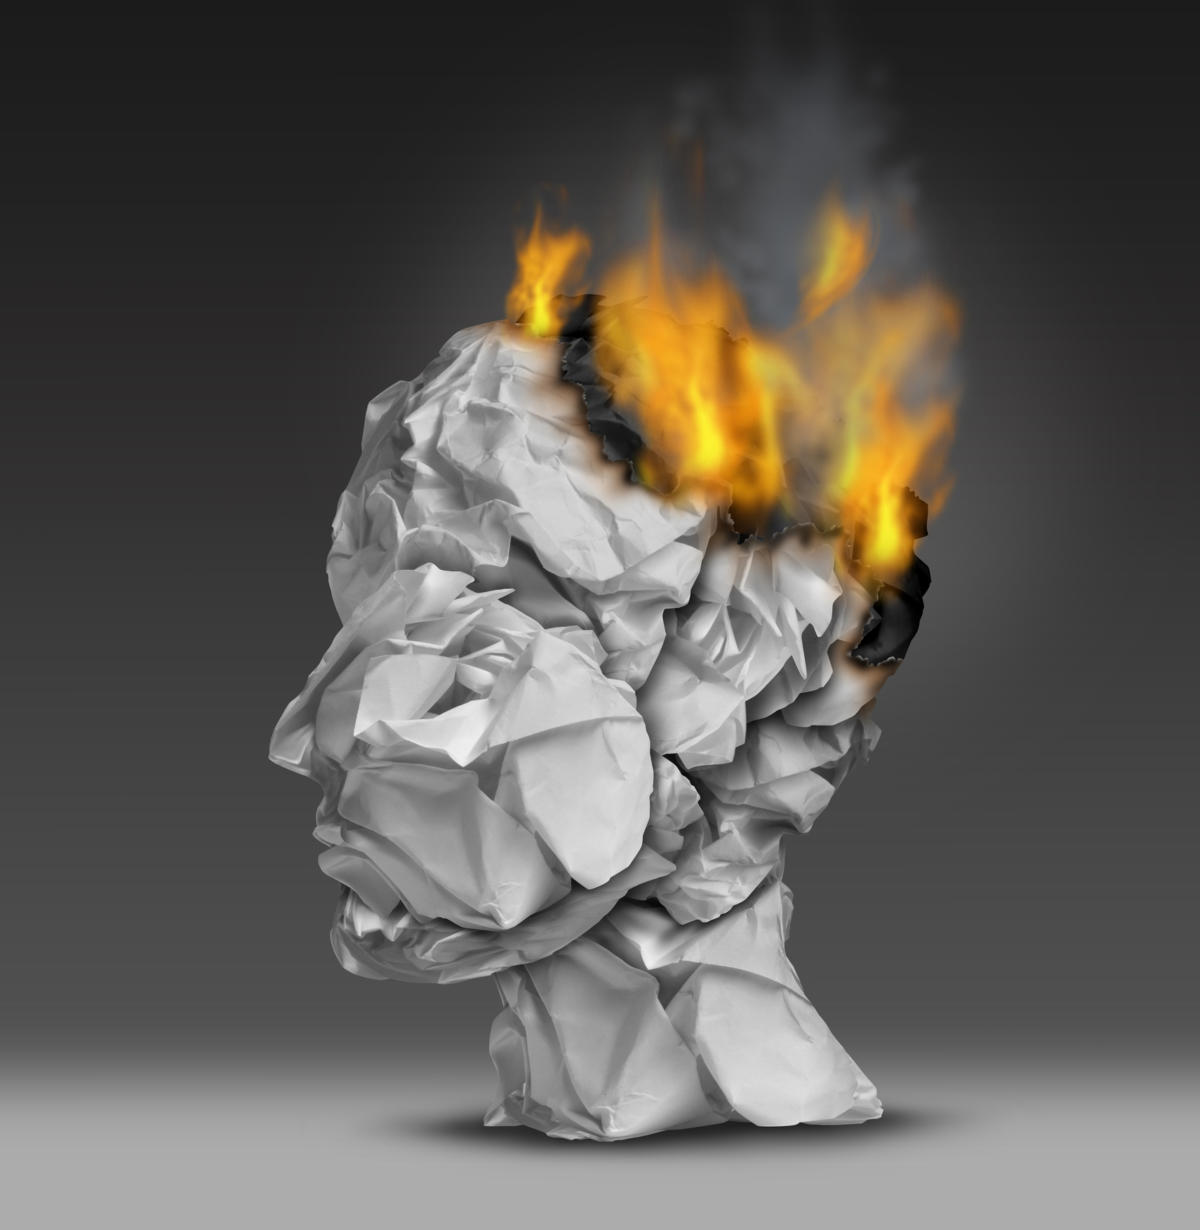 My Experience with Burnout